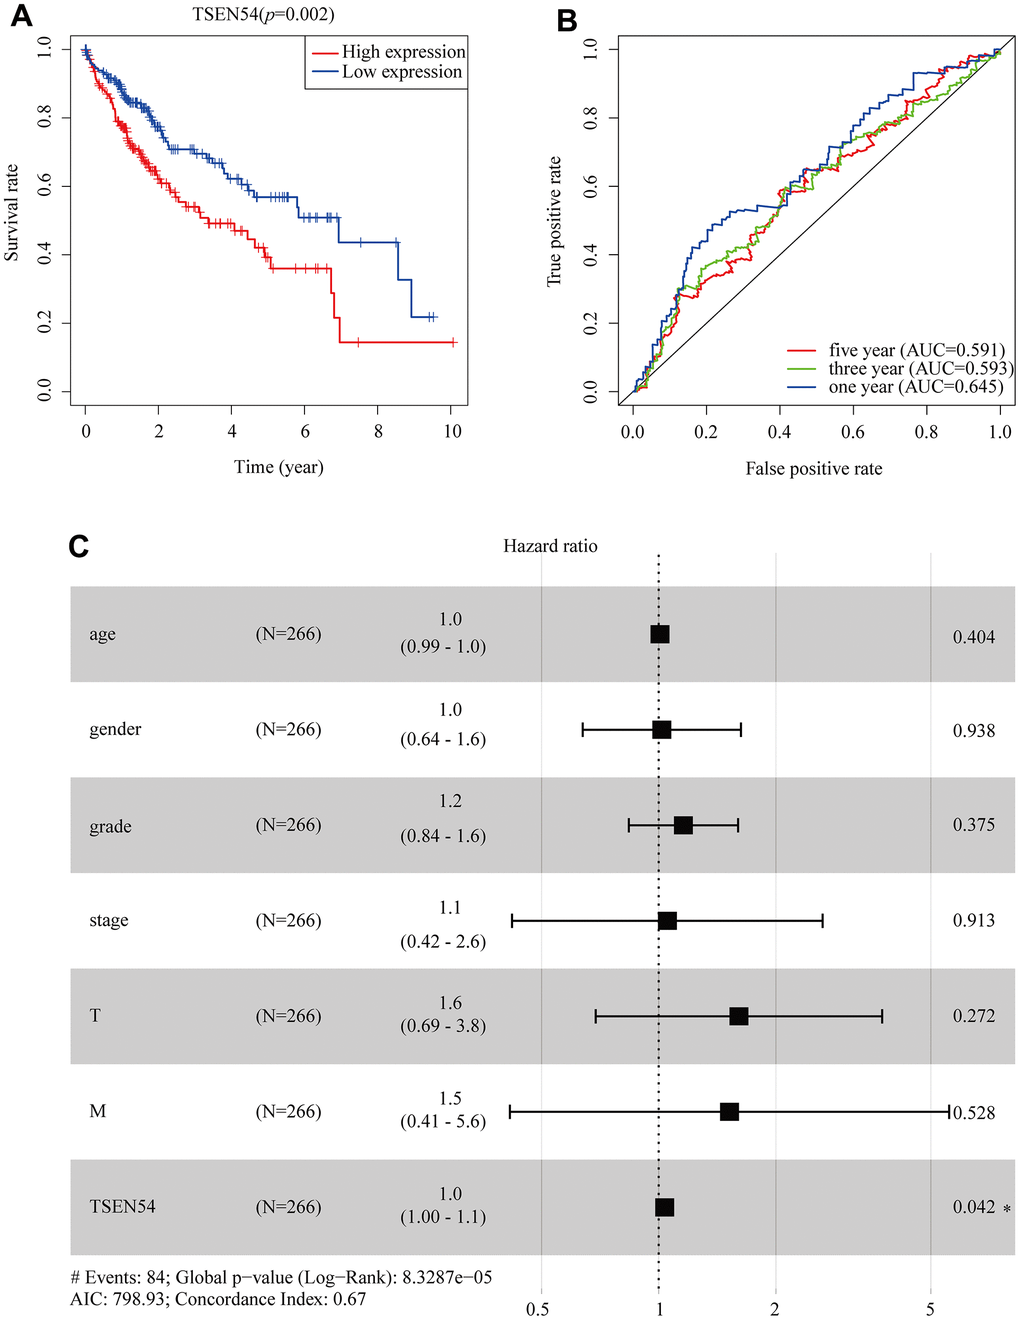 TSEN54 is an independent prognostic factor for the survival of HCC patients. (A) The association between TSEN54 expression and HCC patients based on data downloaded from TCGA. (B) ROC curve for one-, three-, and five-year survival according to TSEN54 expression level. (C) The forest plot displays the result of the multivariate analysis. *ppp